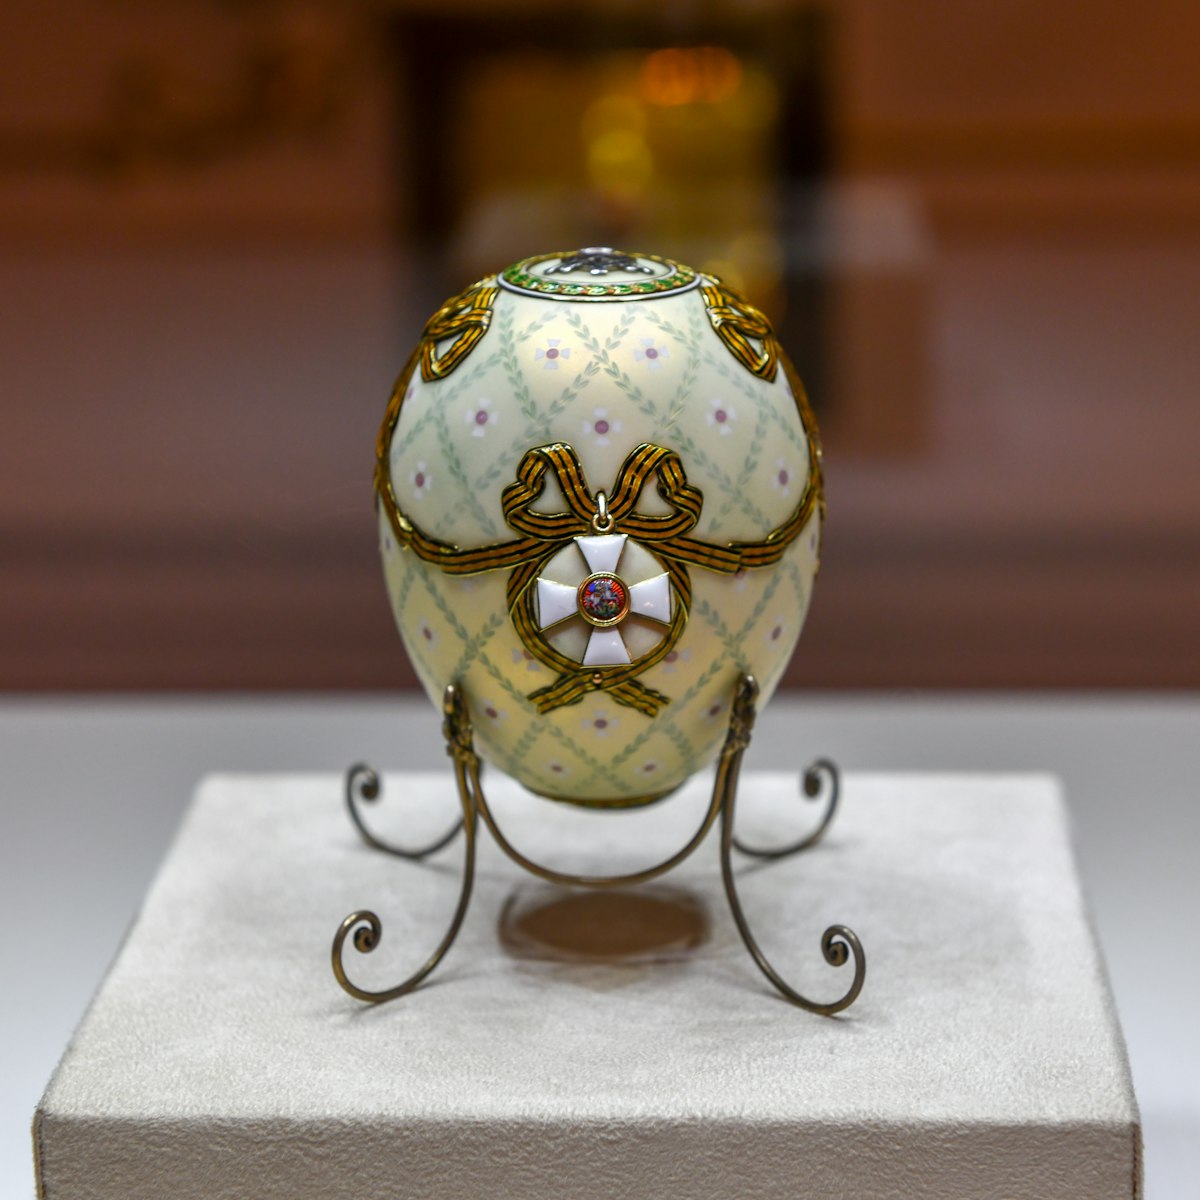 Faberge egg at the Faberge Museum in Saint Petersburg.